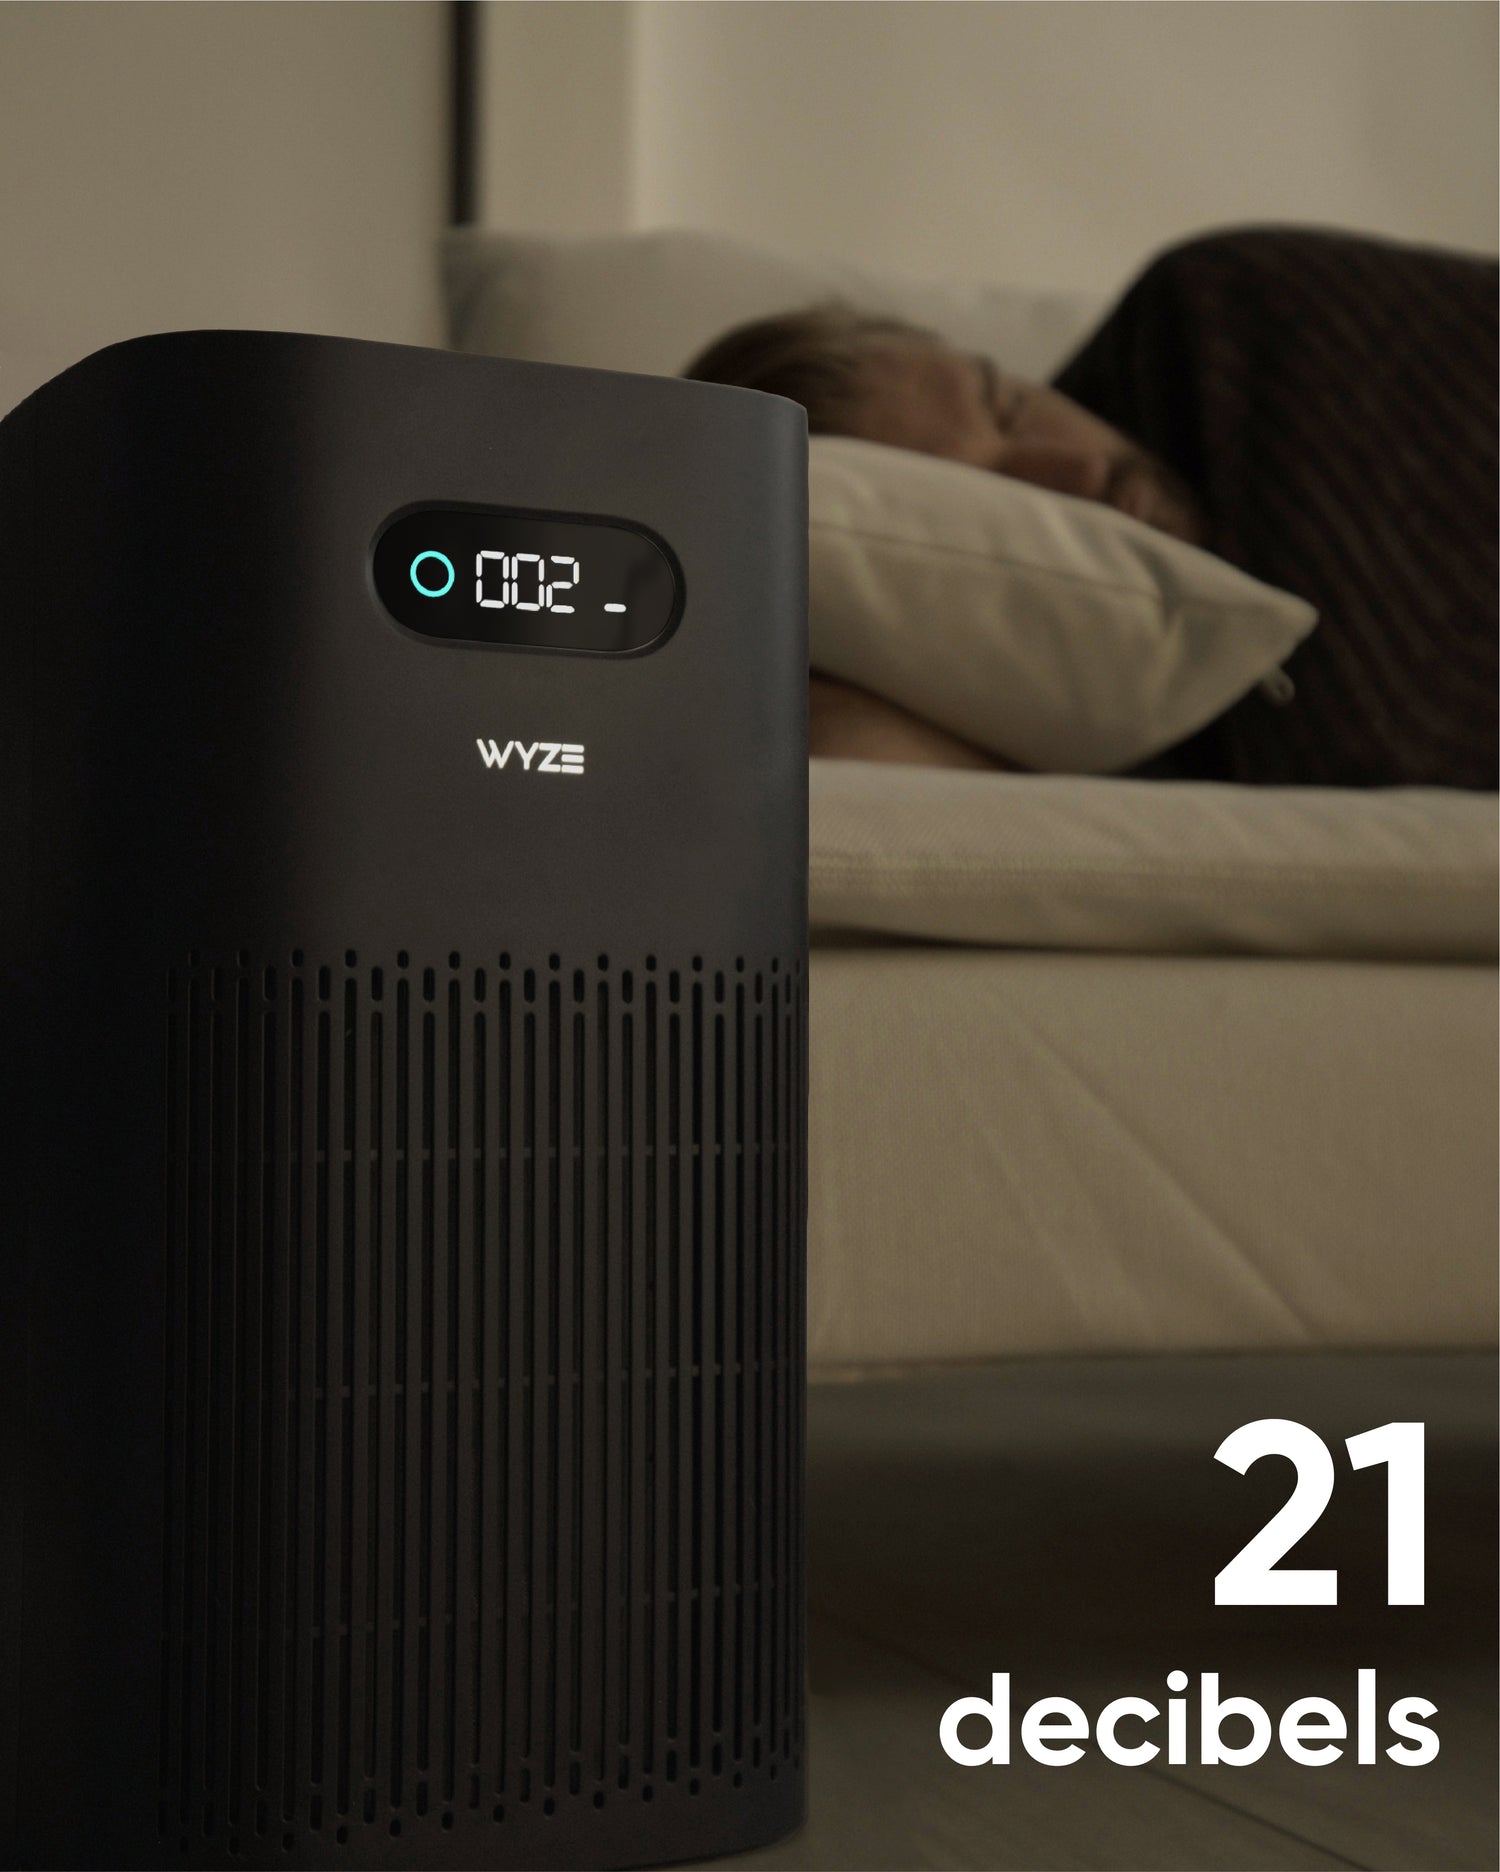 Runs quiet, air purifier next to a person sleeping in bed